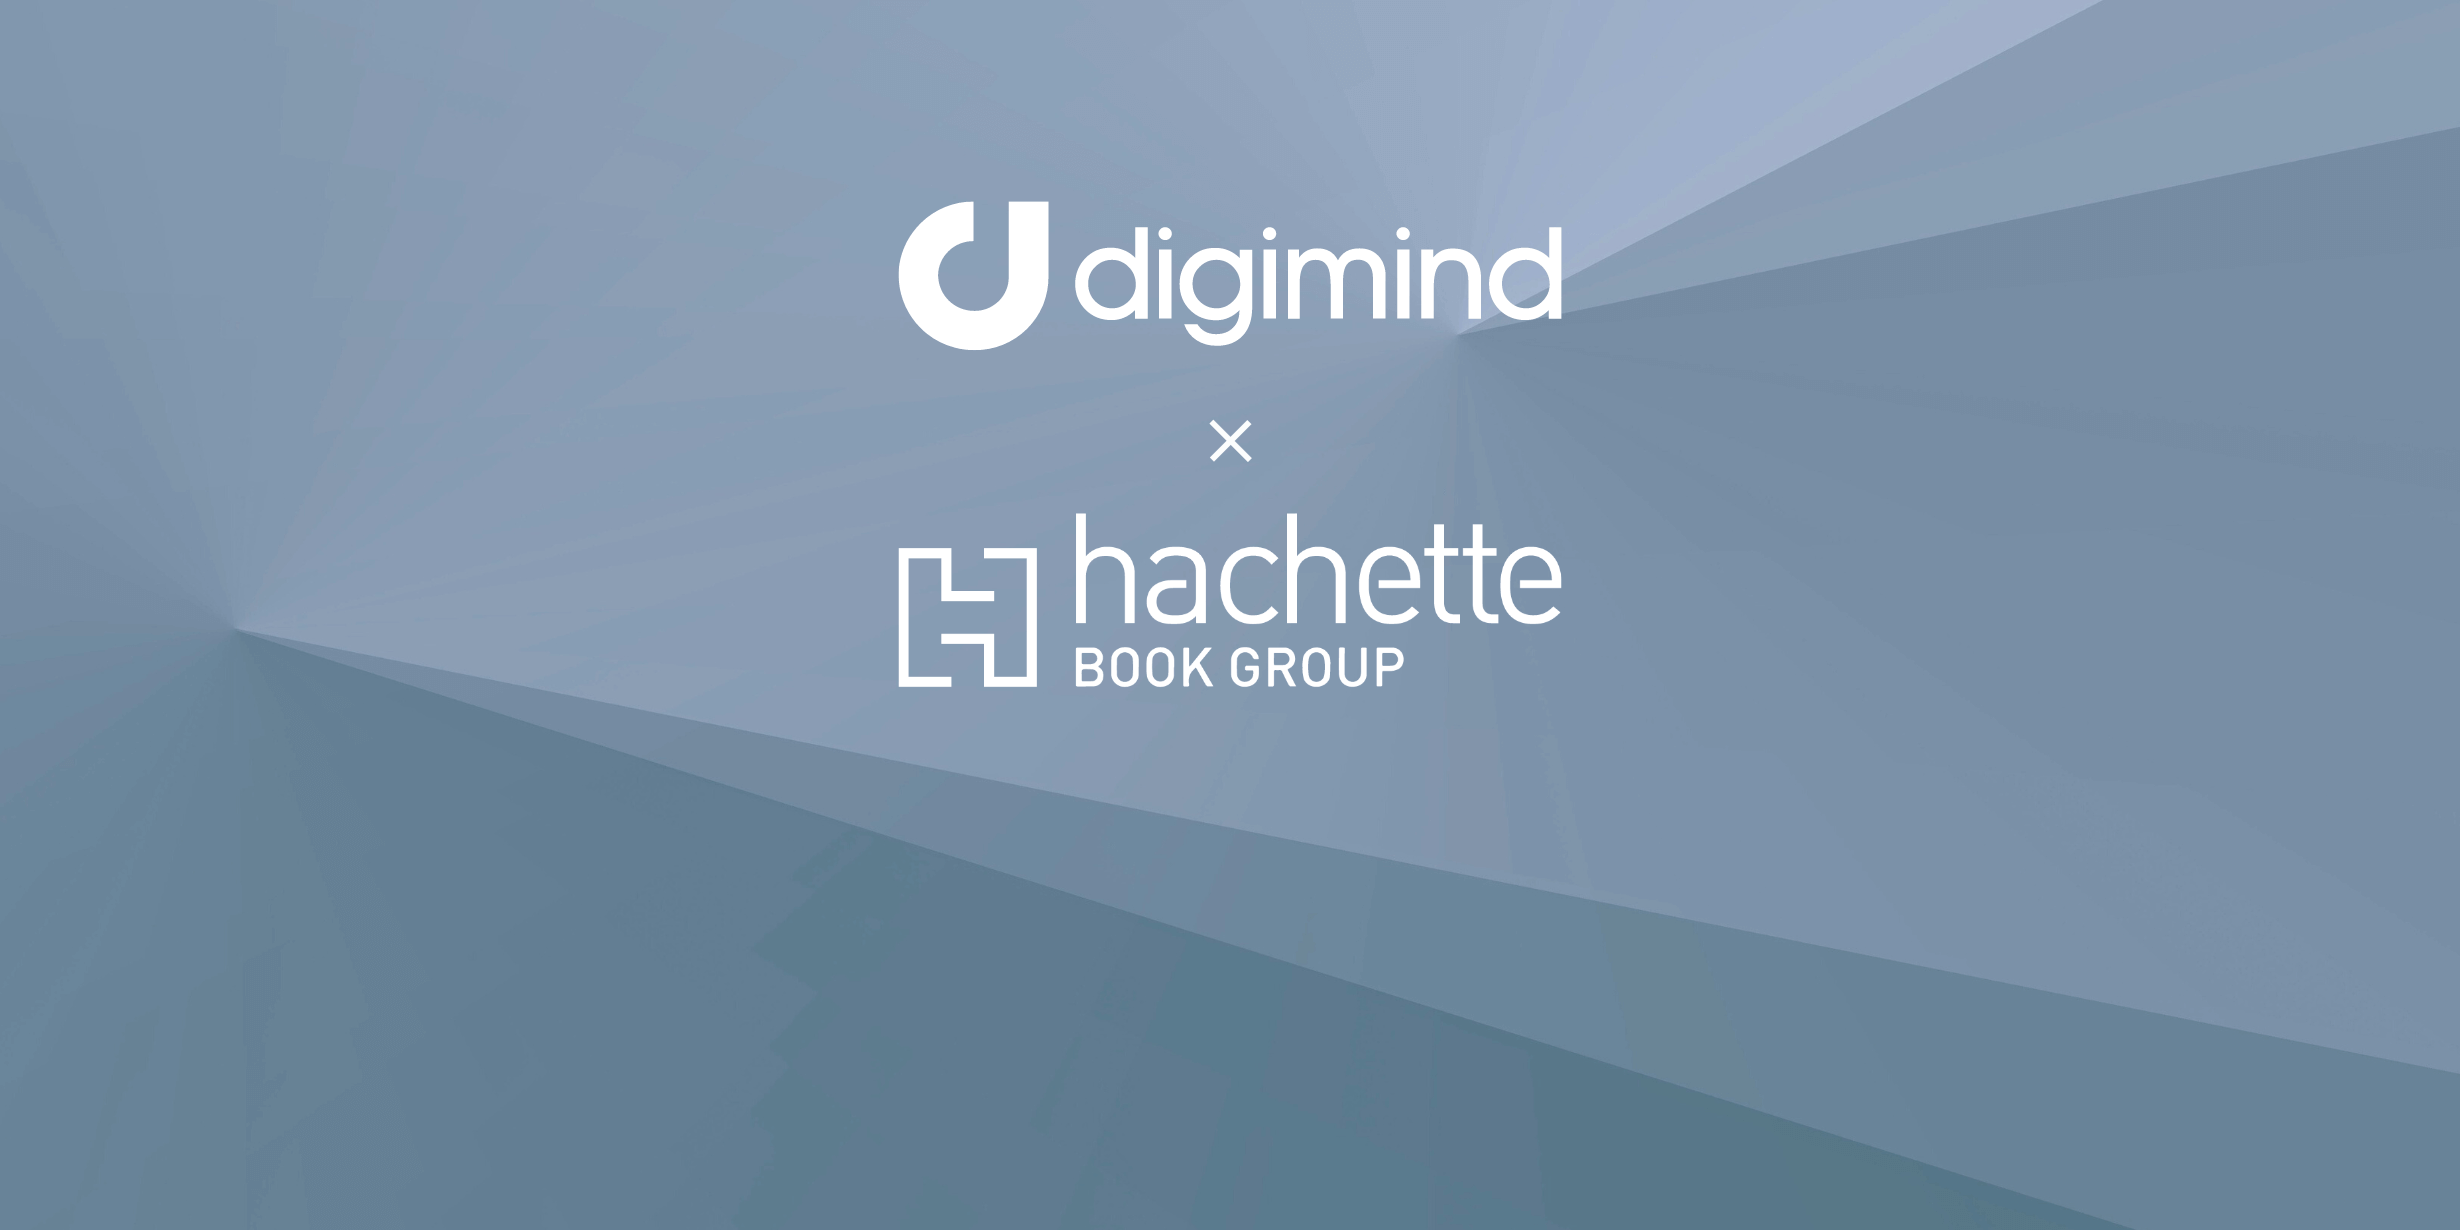 Hachette x Digimind (Blogpost Cover)_tiny